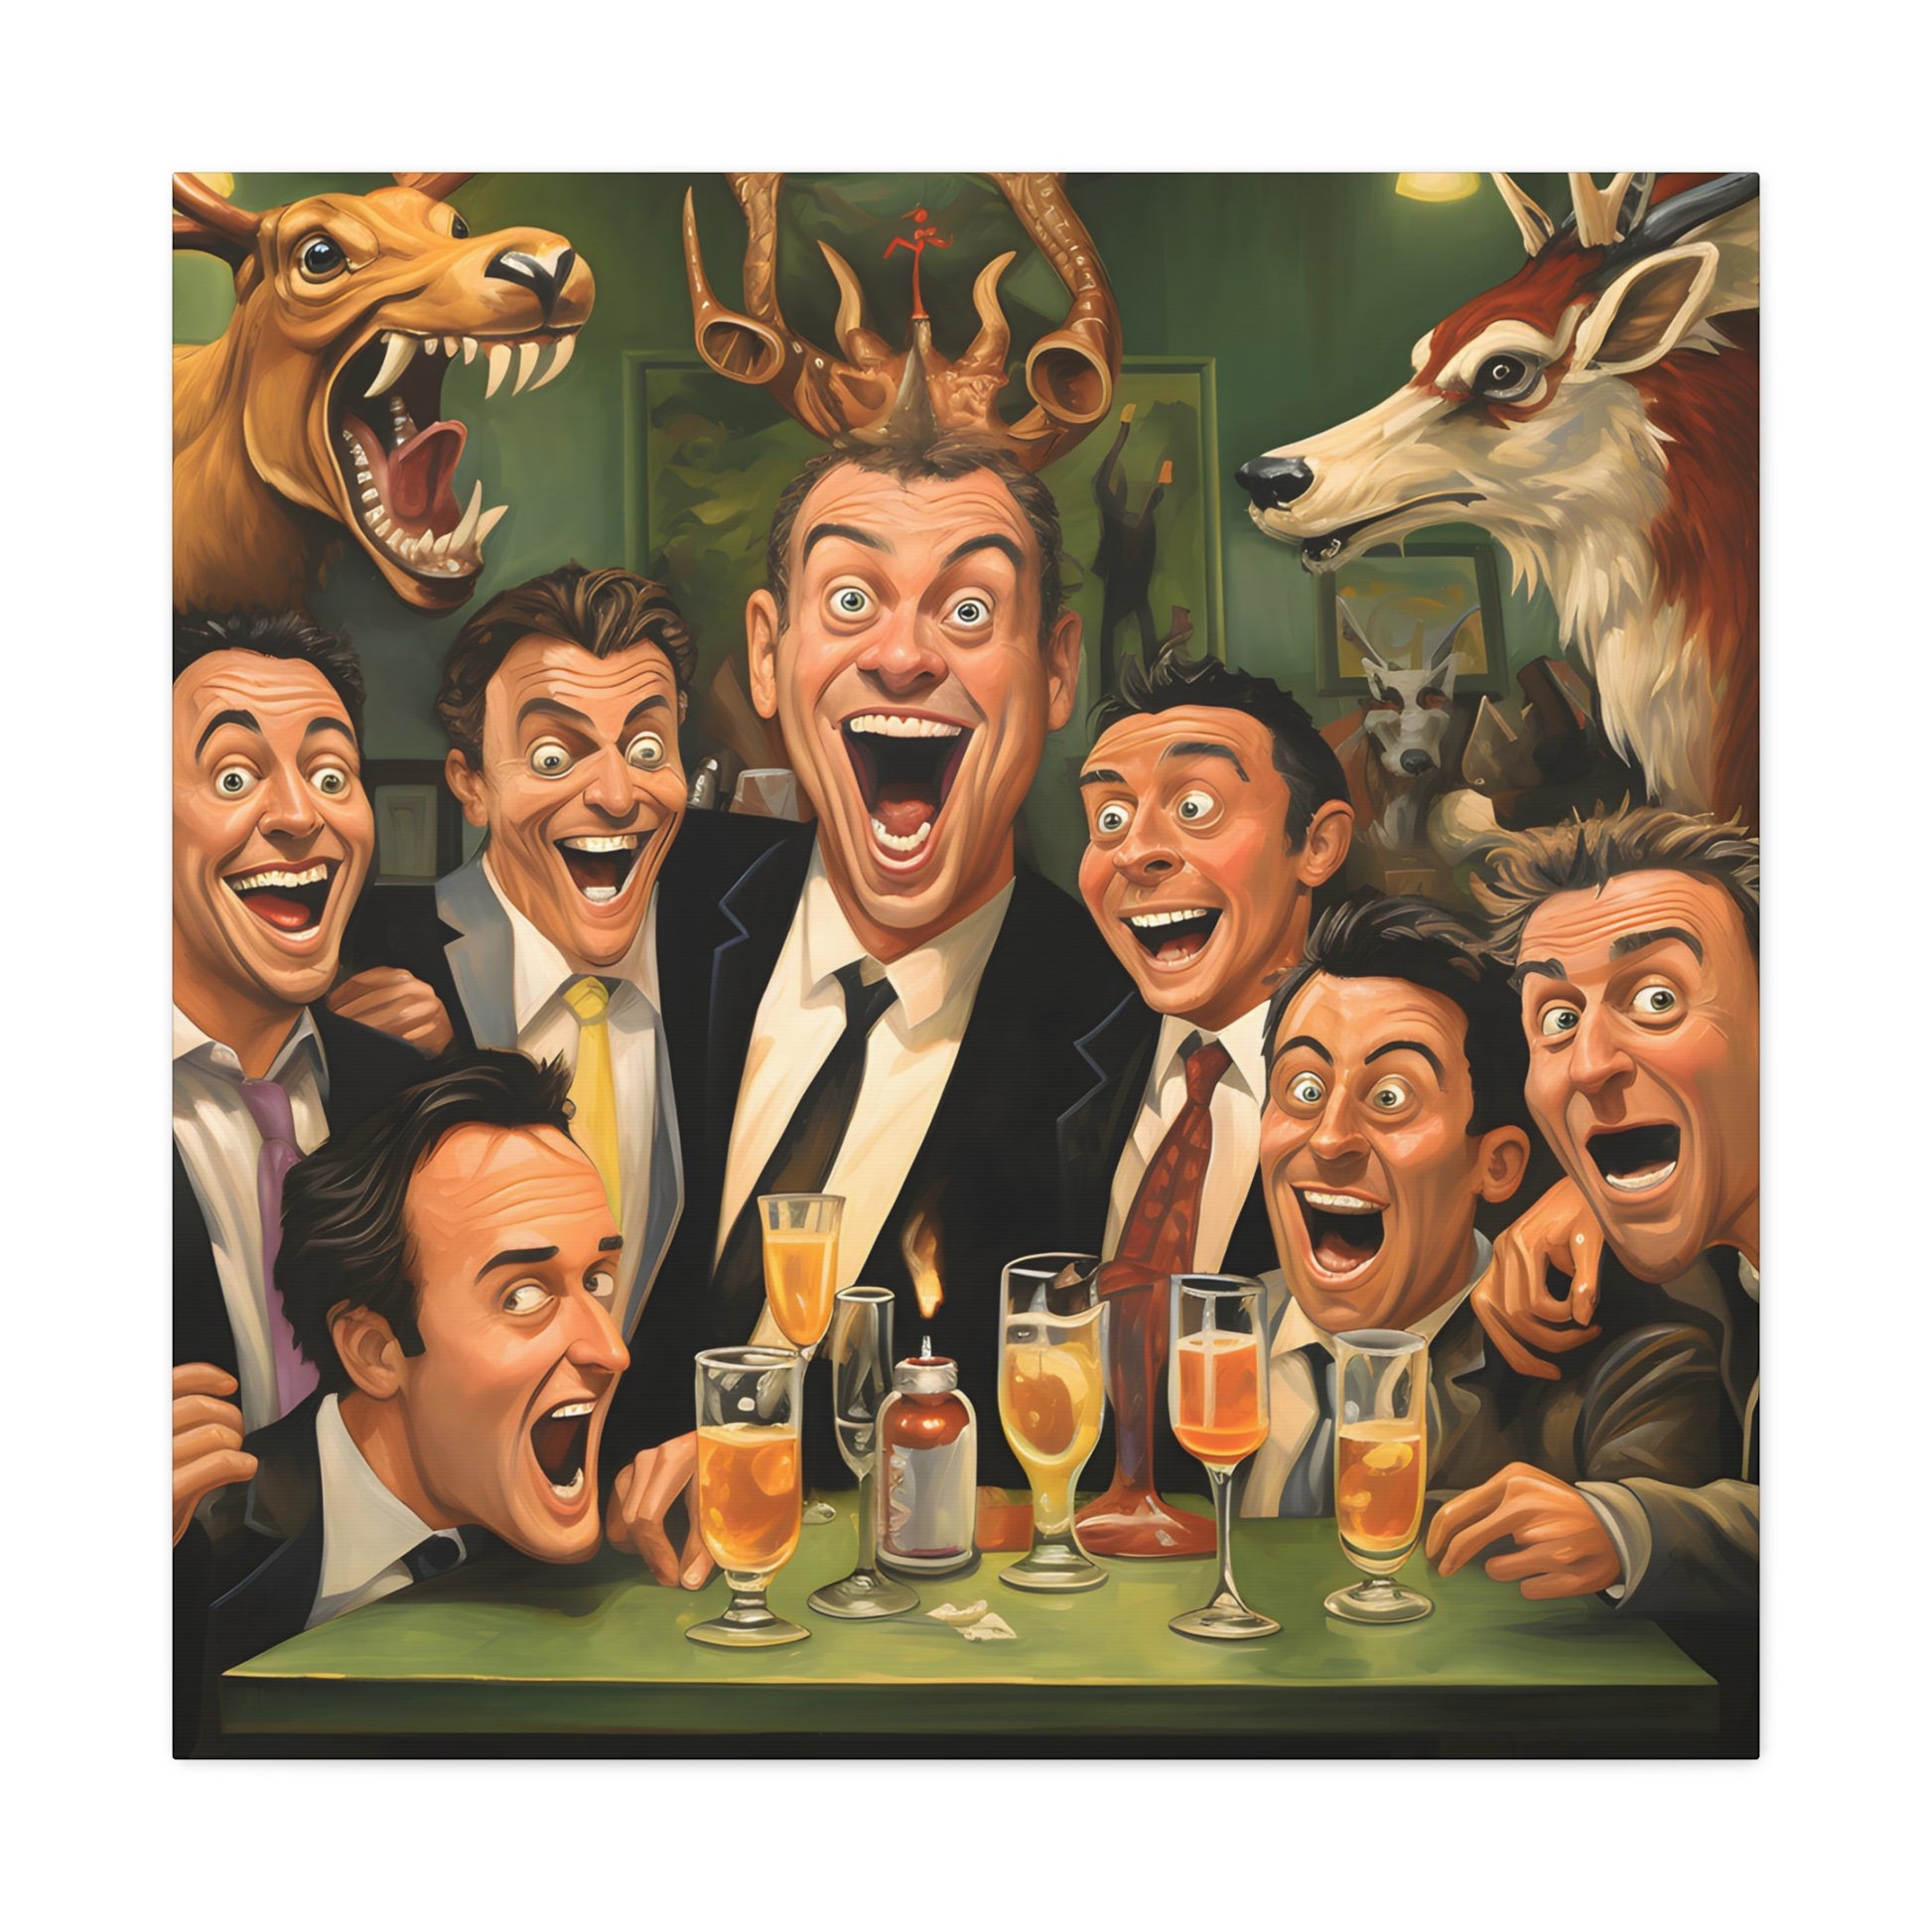 image 2 Cheers to the Groom: A Wild Night's Tale' by Archie Goodwin, a jubilant portrayal of a stag night full of laughter and camaraderie. The artwork features a backdrop of taxidermy and toasts, with each character's exaggerated expression telling a story of epic merriment and brotherhood